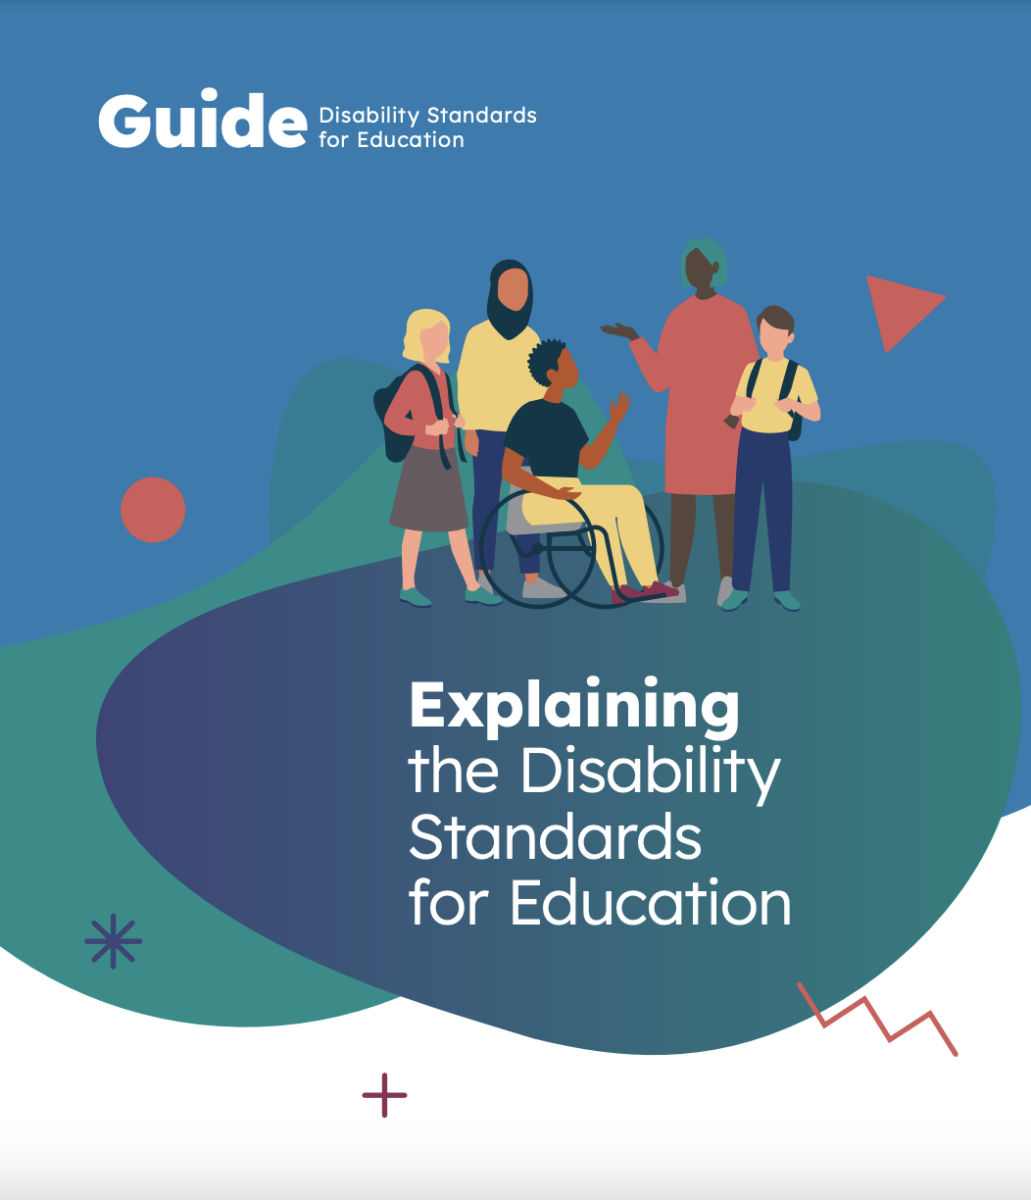 PDF Cover of the guide to the disability standards for education with blue and green curvy shapes and a graphic of a group of people talking including a man in a wheelchair.